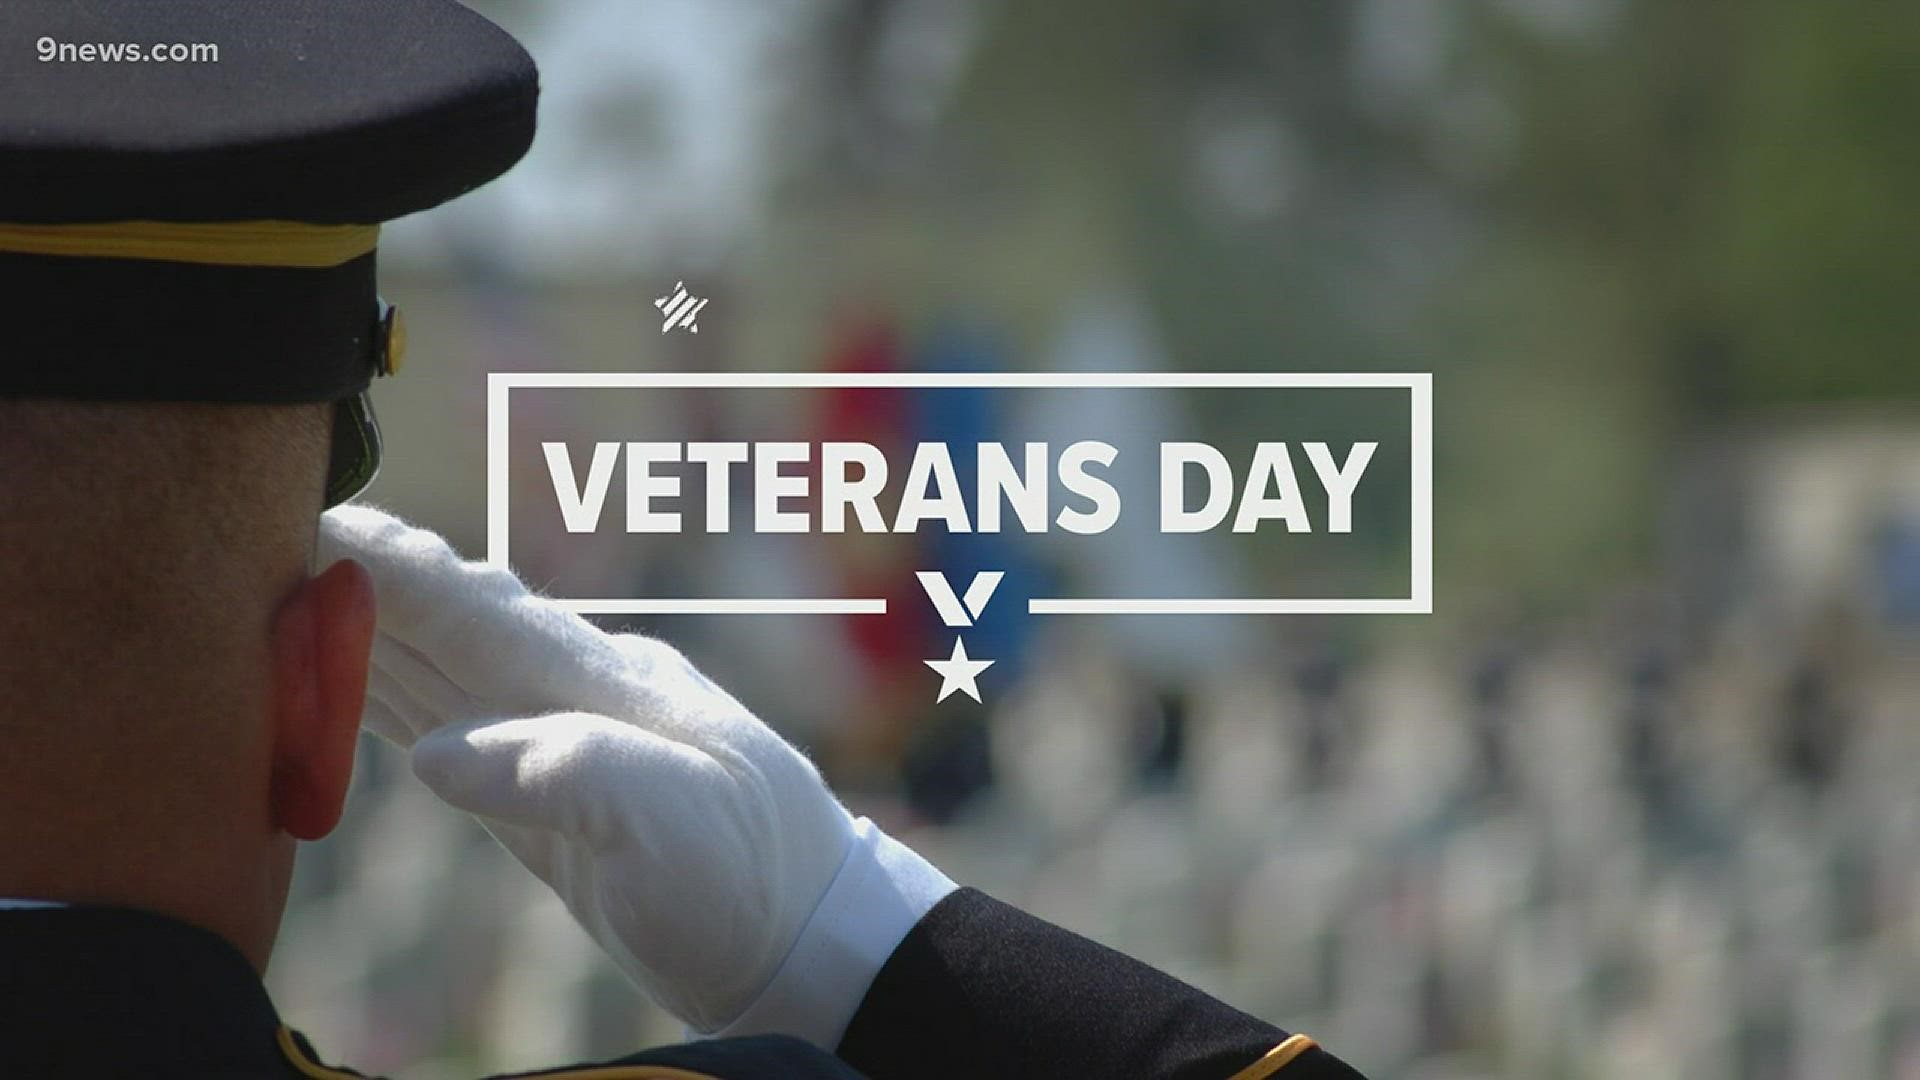 This Veterans Day marks the 100th anniversary of the end of World War I. Today at Fort Logan Cemetery, the VA National Cemetery Administration, in conjunction with the Colorado National Guard and several more military agencies, honored men and women who h